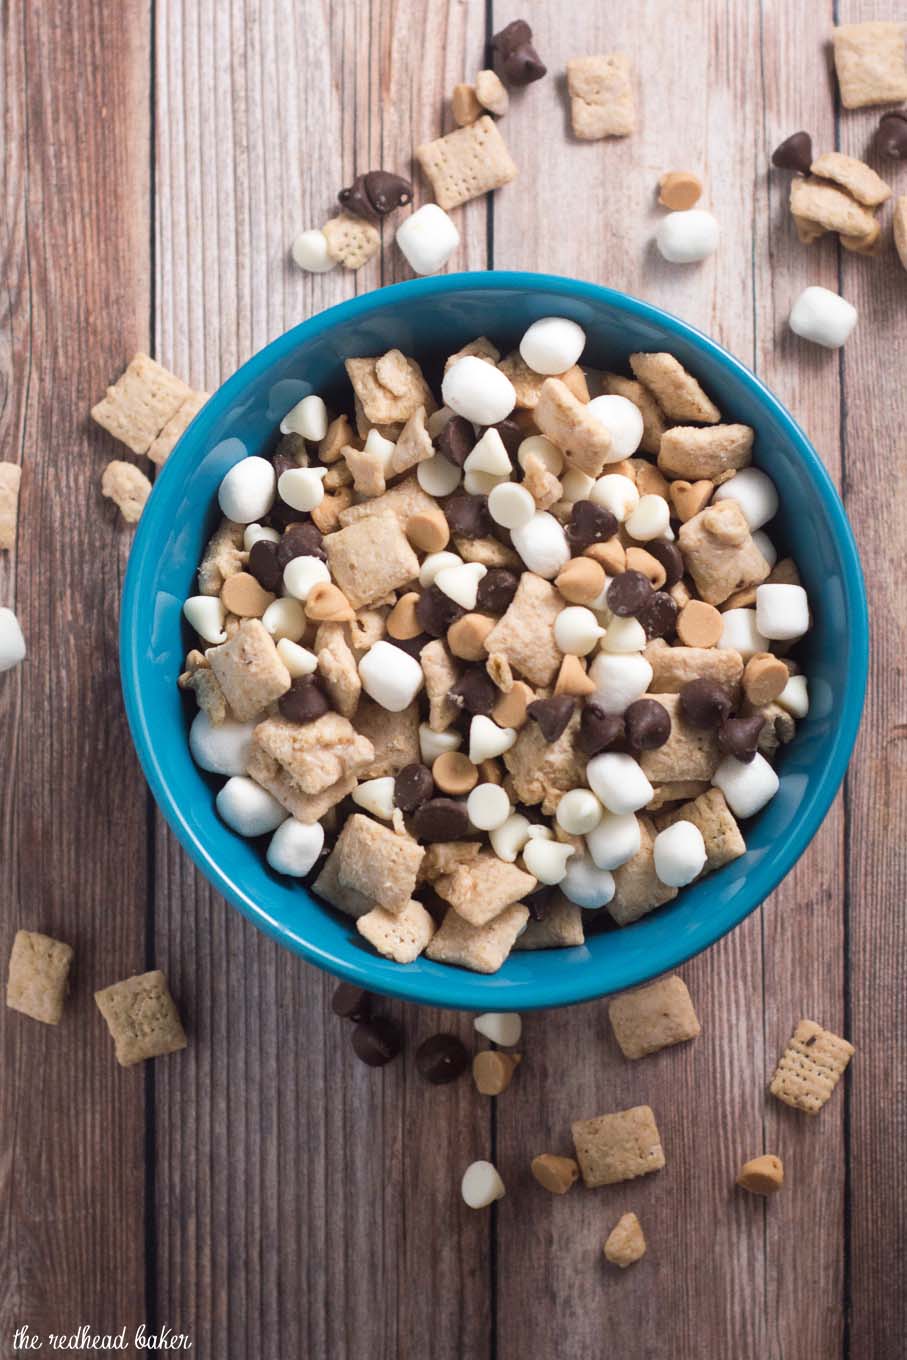 Avalanche Bark Muddy Buddies combine Chex cereal, peanut butter, white chocolate, semisweet chocolate and marshmallows in an addictive snack!